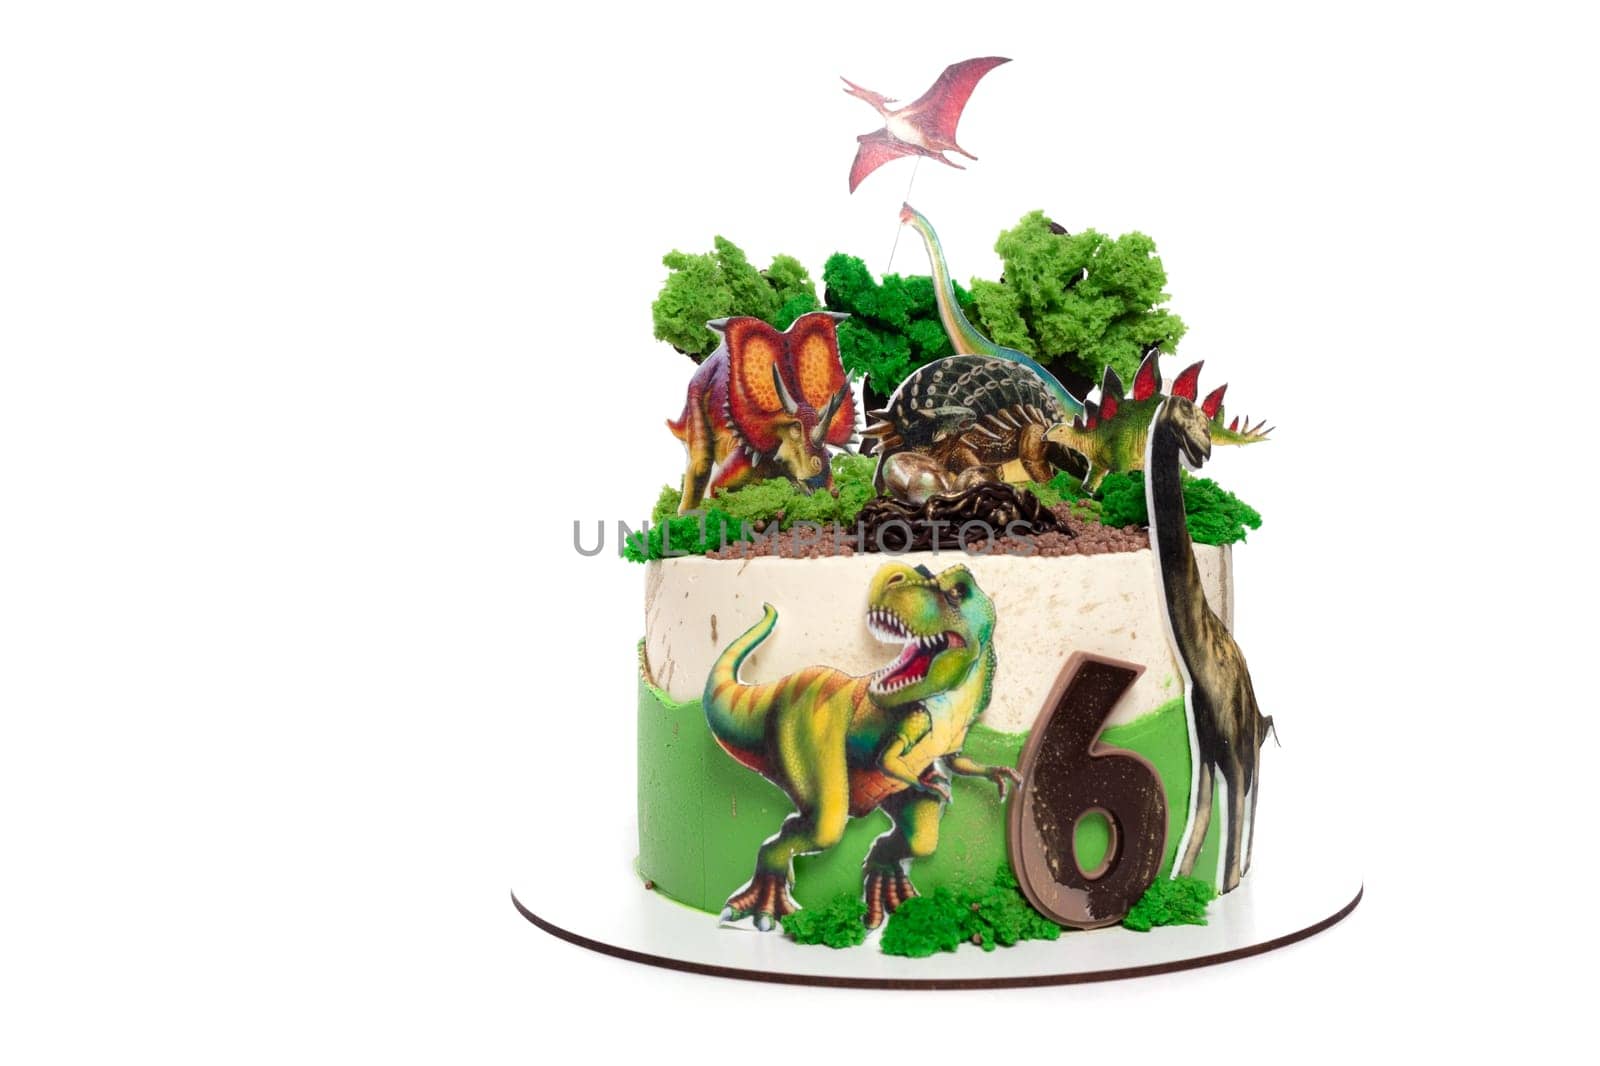 Birthday Cake Featuring Dinosaurs and Birds by TRMK